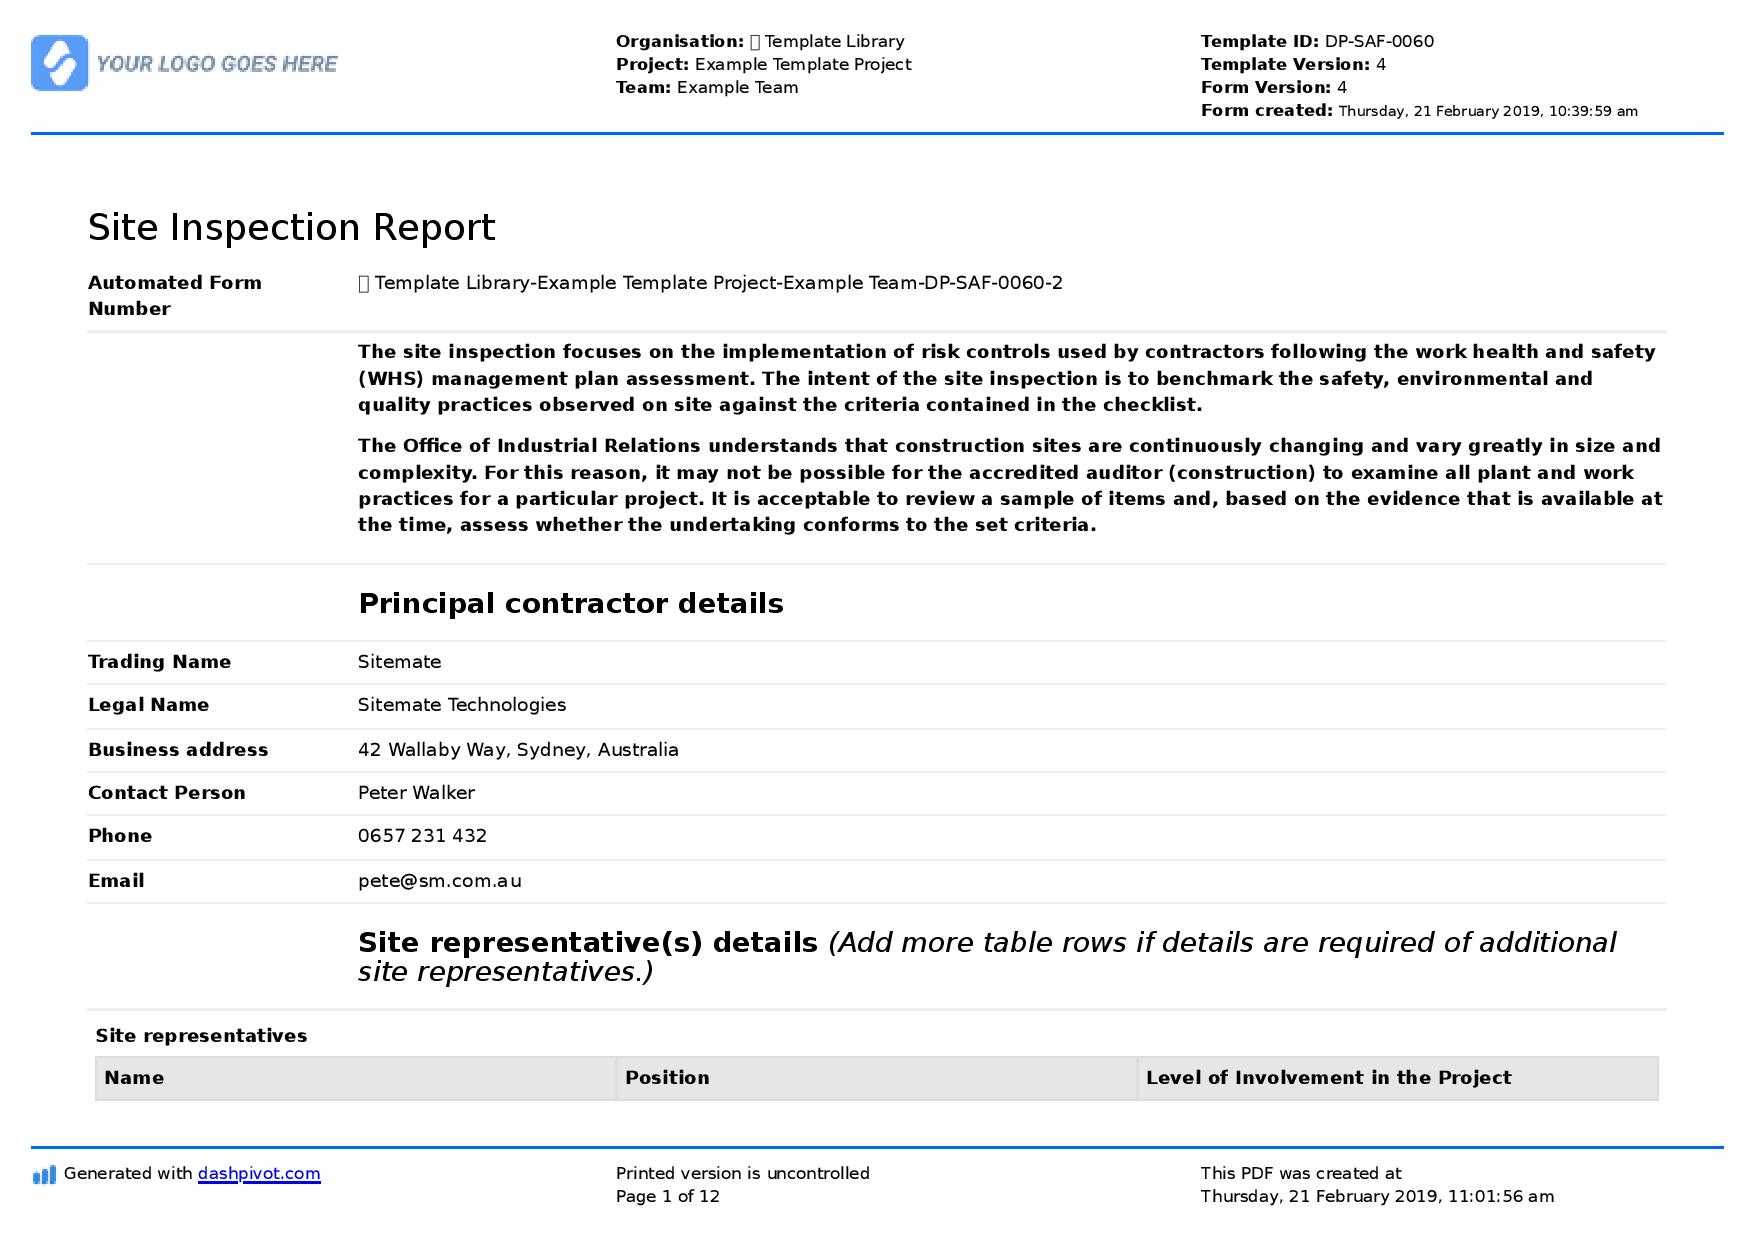 Site Inspection Report: Free Template, Sample And A Proven With Regard To Property Management Inspection Report Template